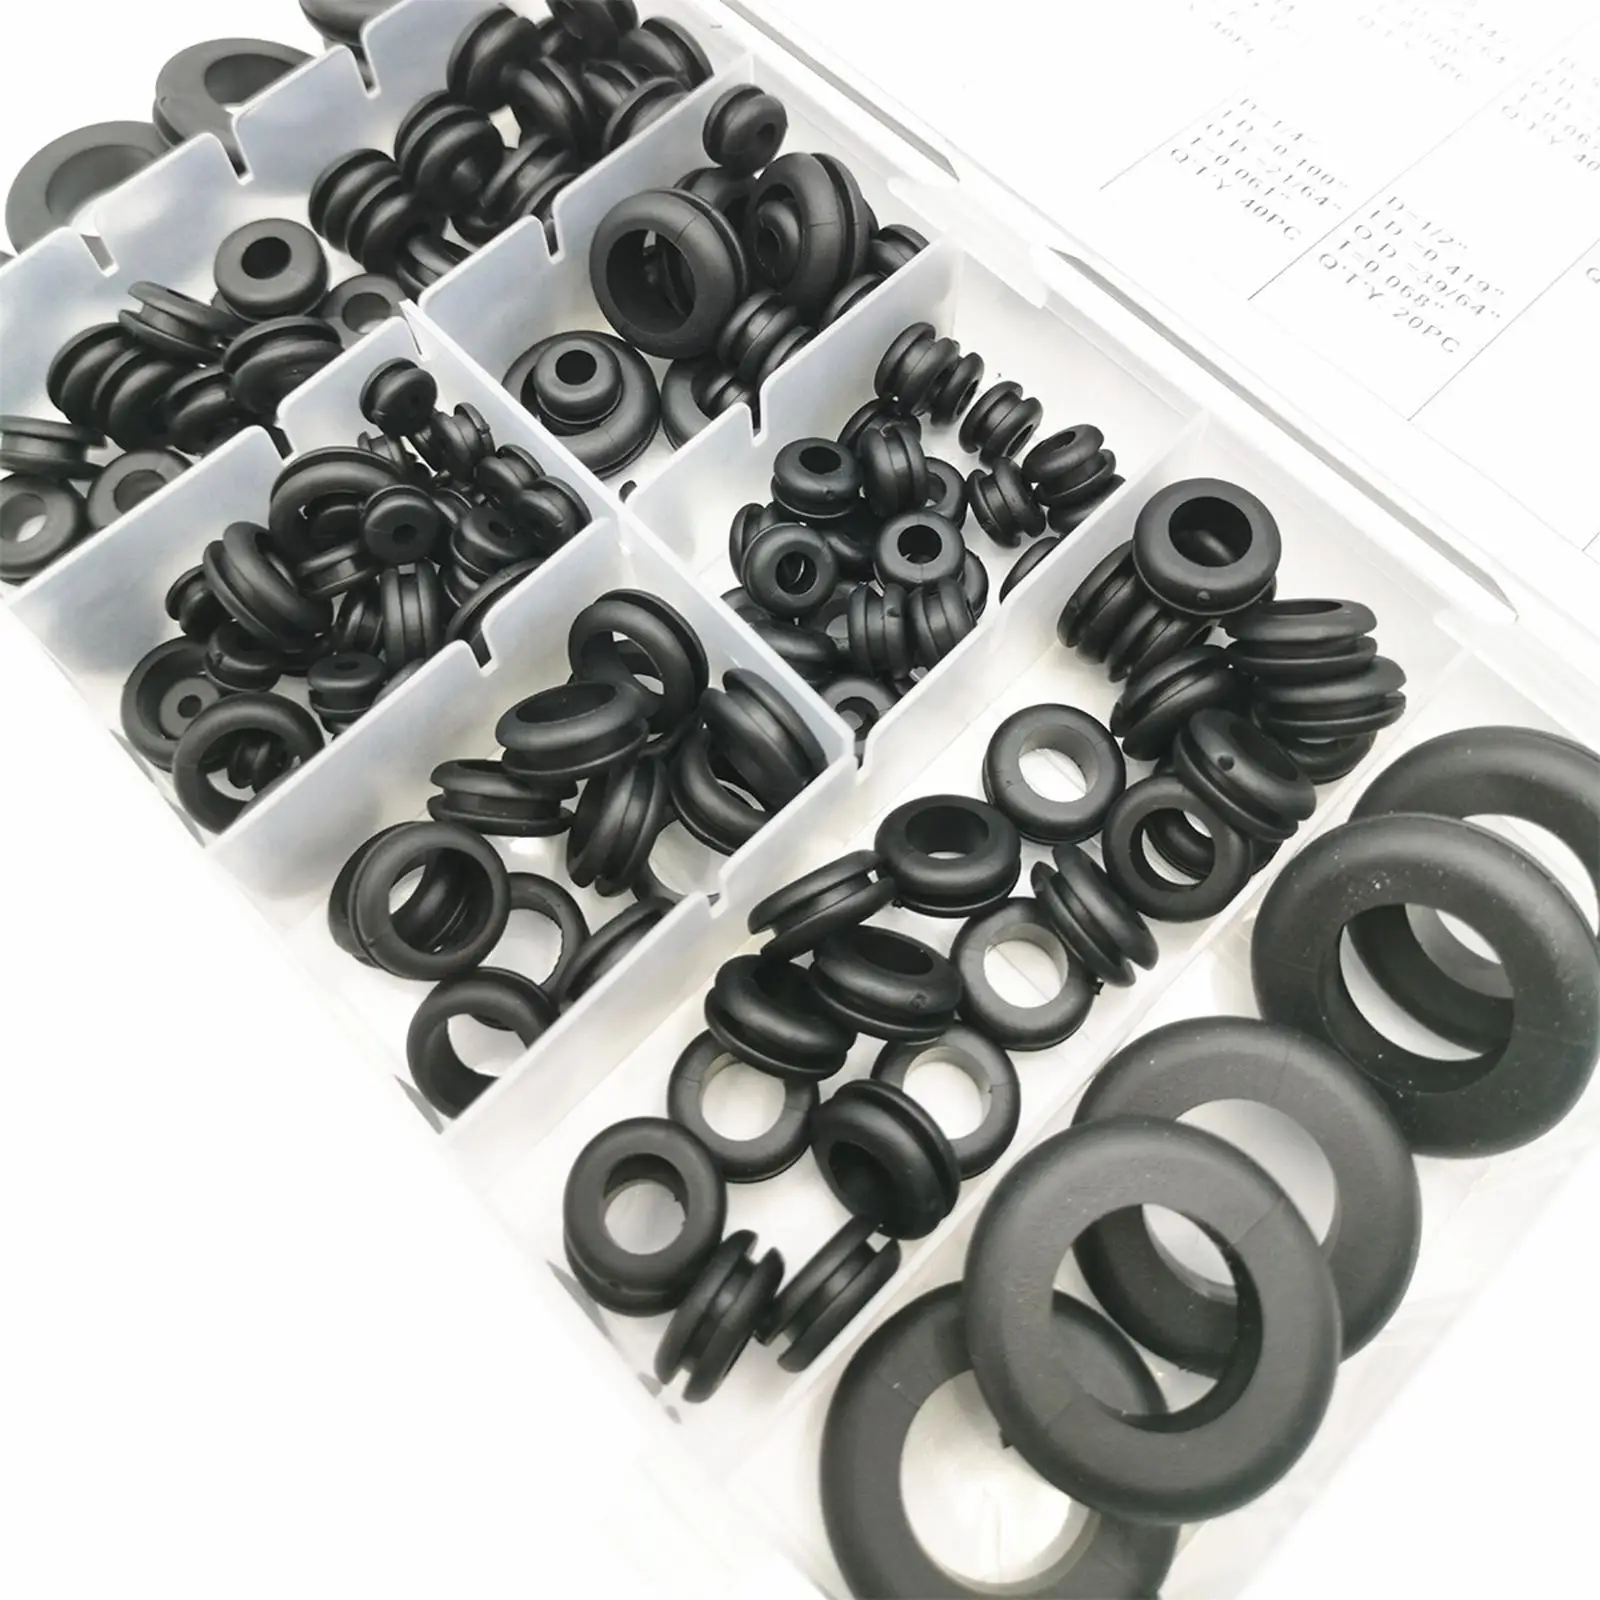 180 Pieces Rubber Grommets Assorted Sizes Ring Grommets Accessories for Plugs